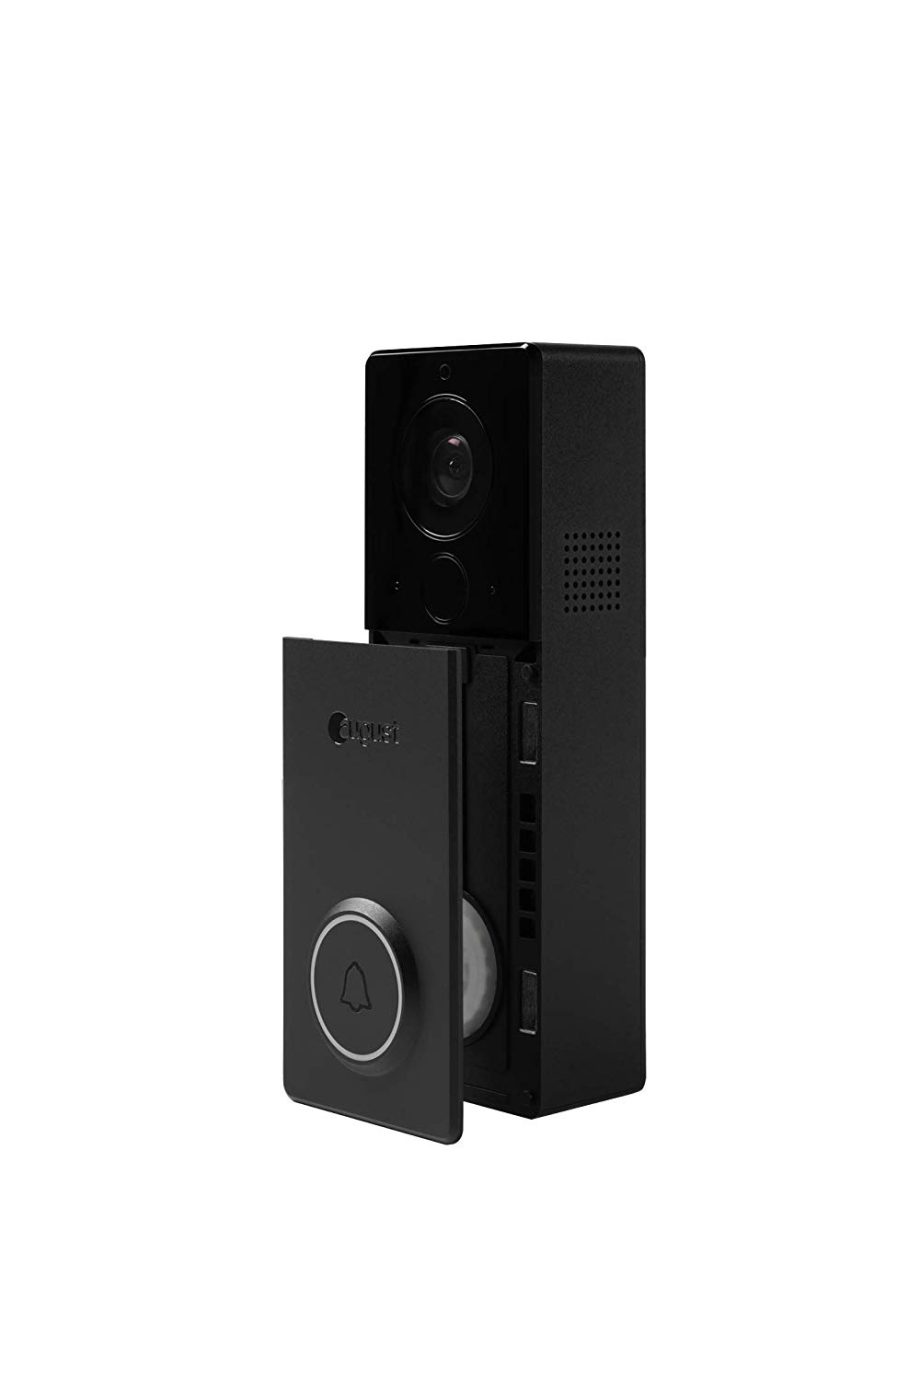 Yale AUG-AB03-C04-001 View Smart Wireless Video Doorbell, Battery, Black